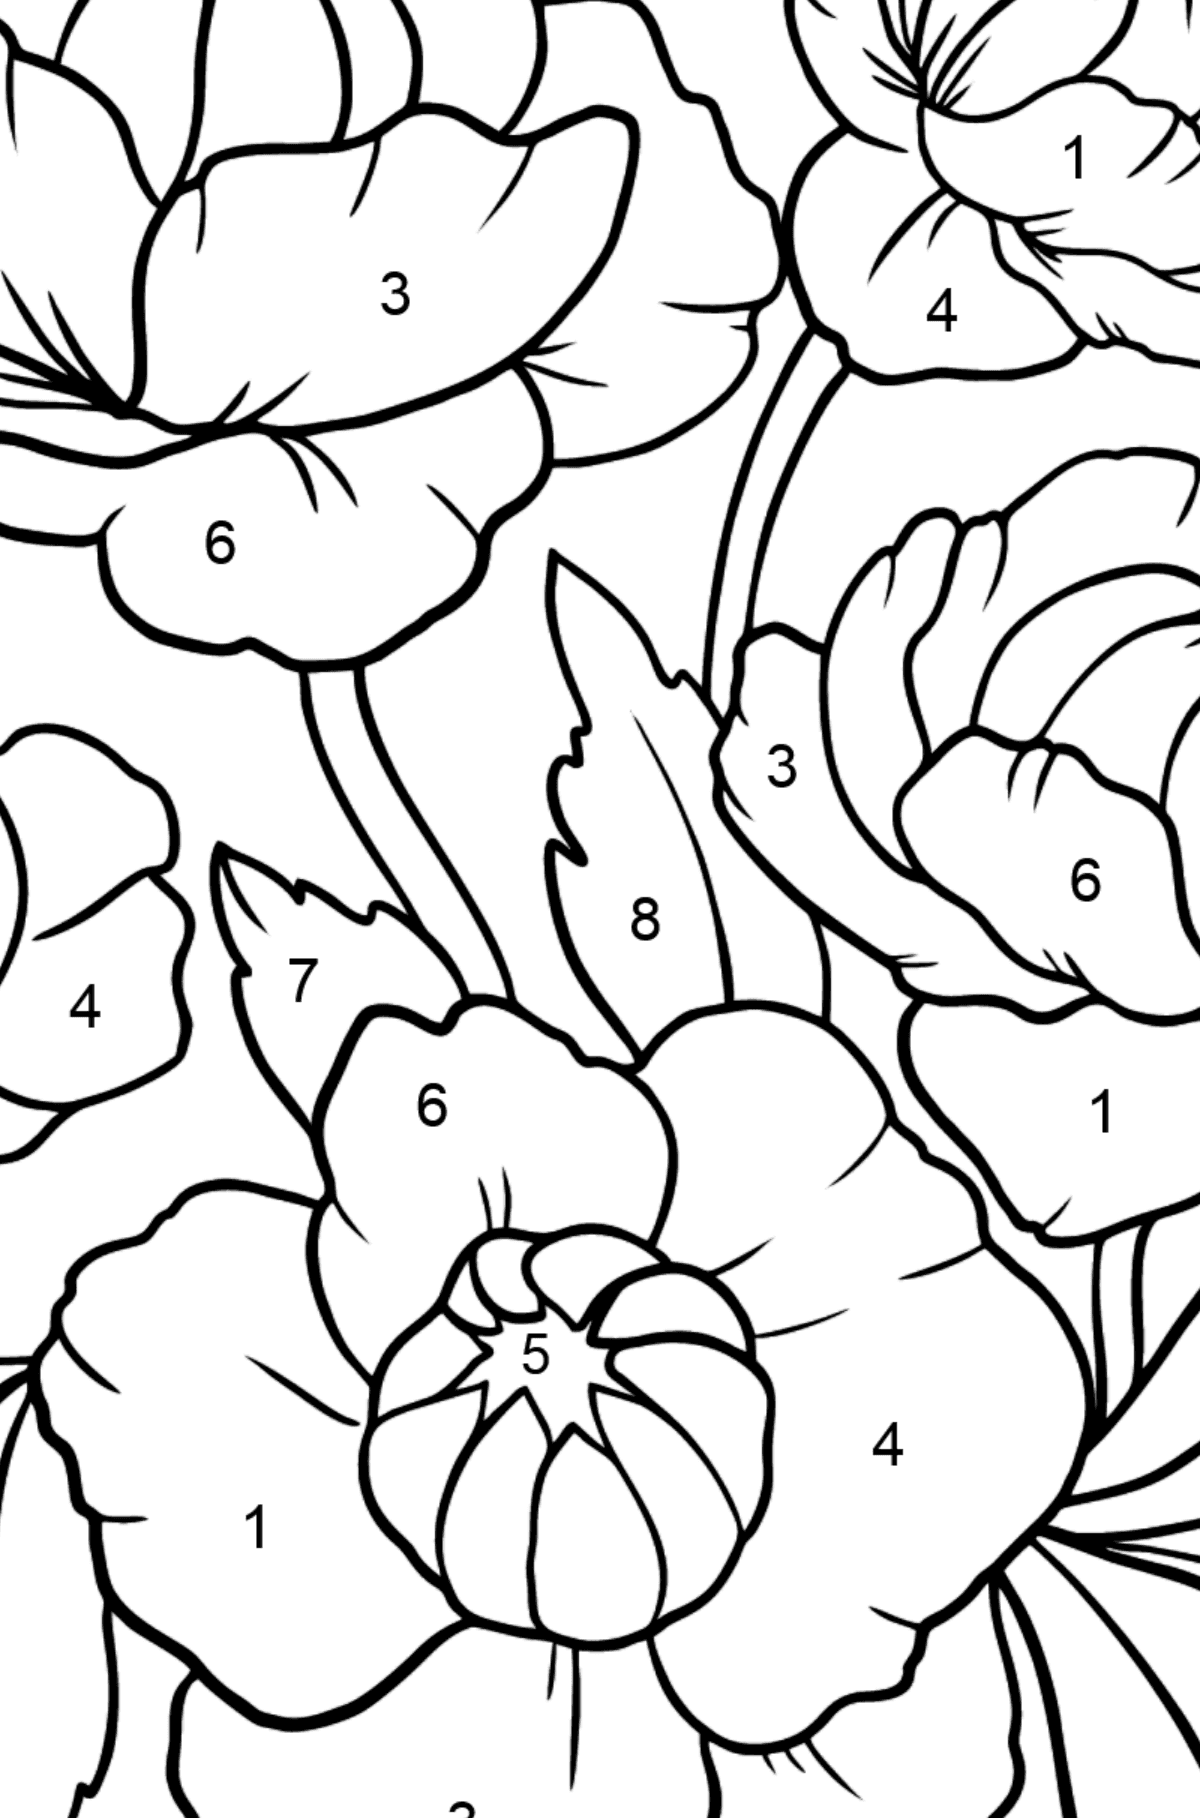 Flower Coloring Page - A Pink Globeflower - Coloring by Numbers for Kids